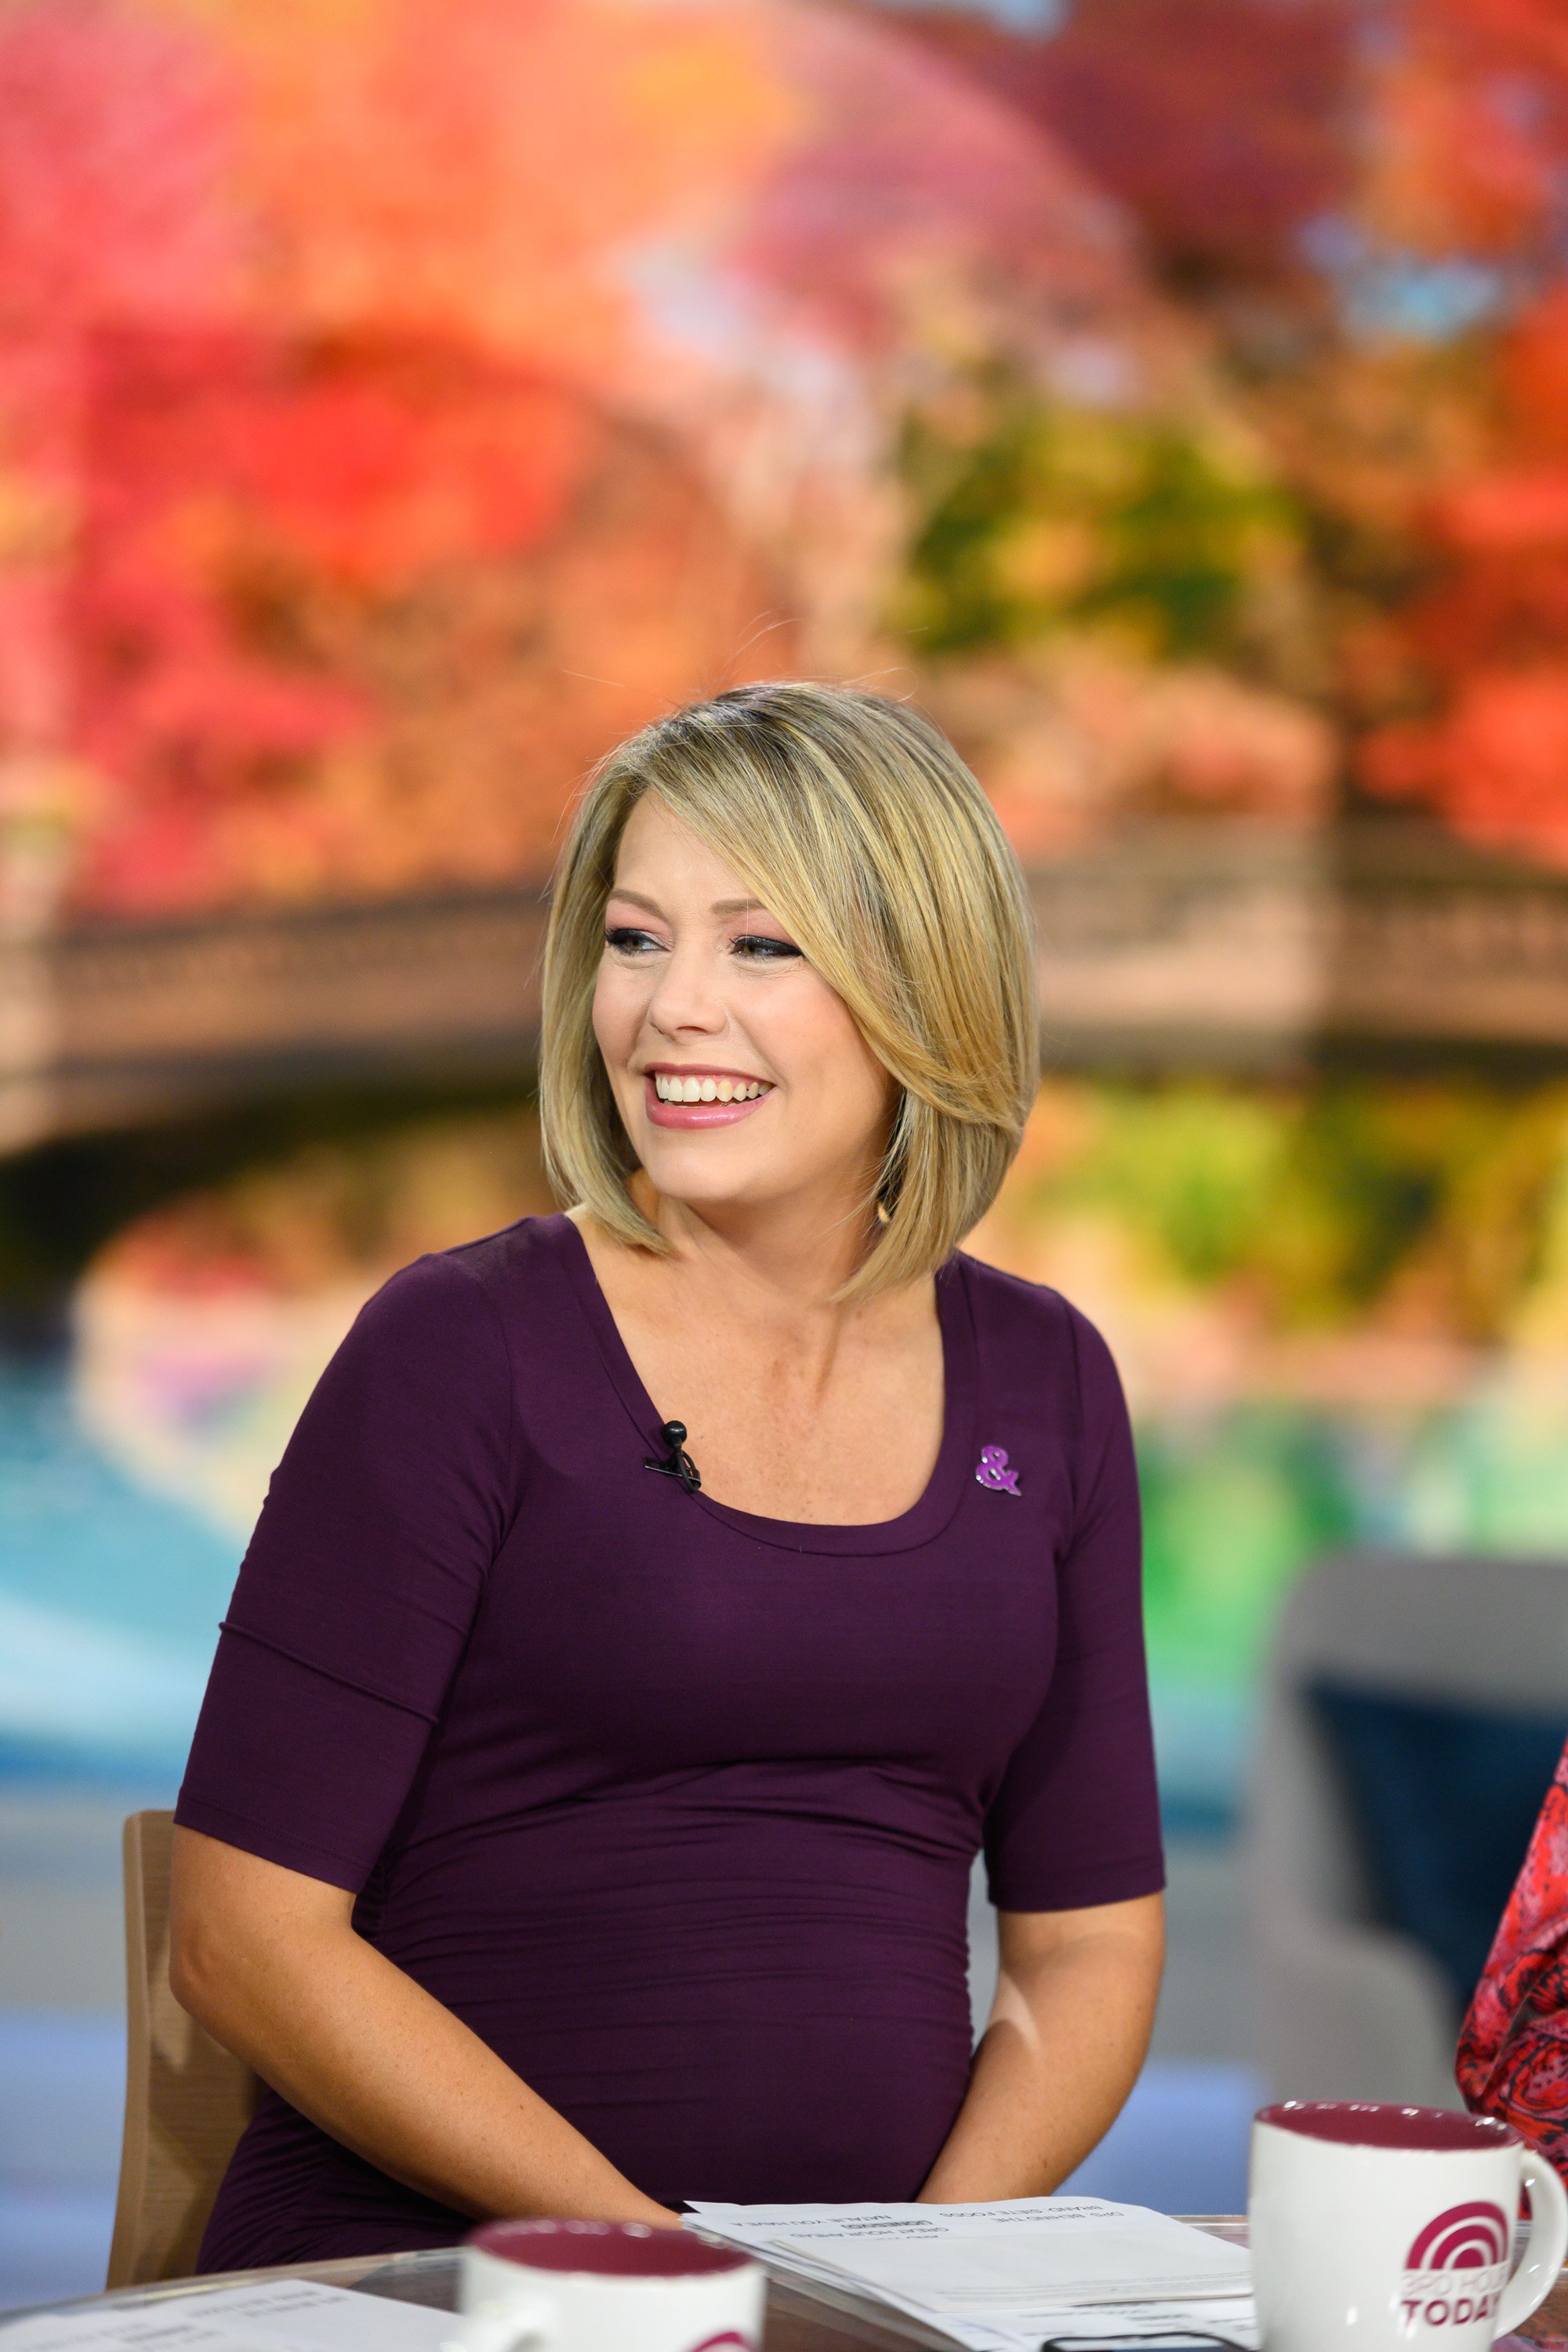 Dylan Dreyer appears on season 68 of "The Today Show" on Thursday, October 17, 2019 | Photo: Getty Images